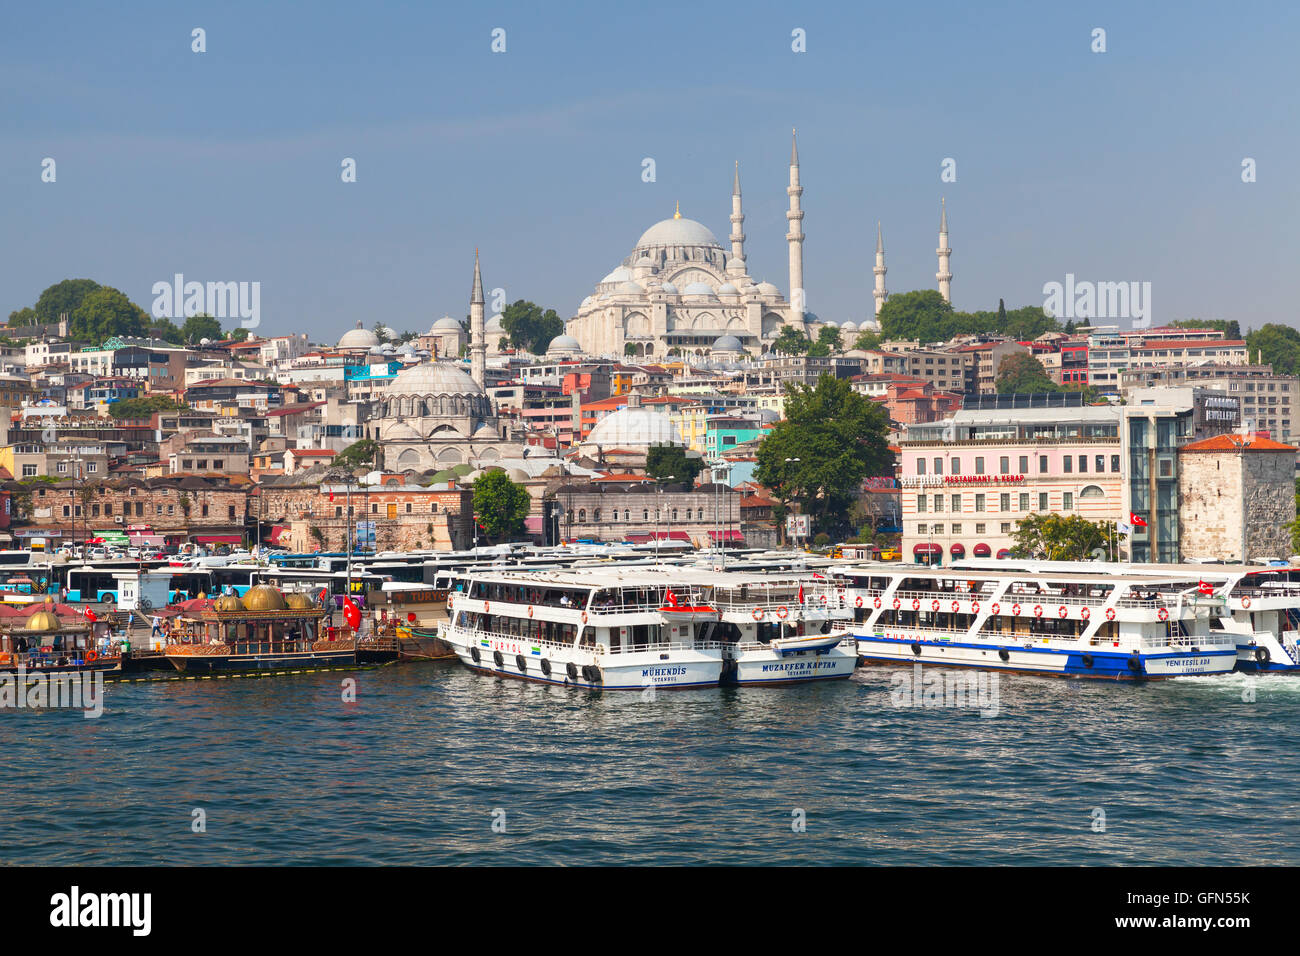 Istanbul, Turkey - July 1, 2016: Cityscape with passenger ships in Golden Horn a major urban waterway and the primary inlet of t Stock Photo